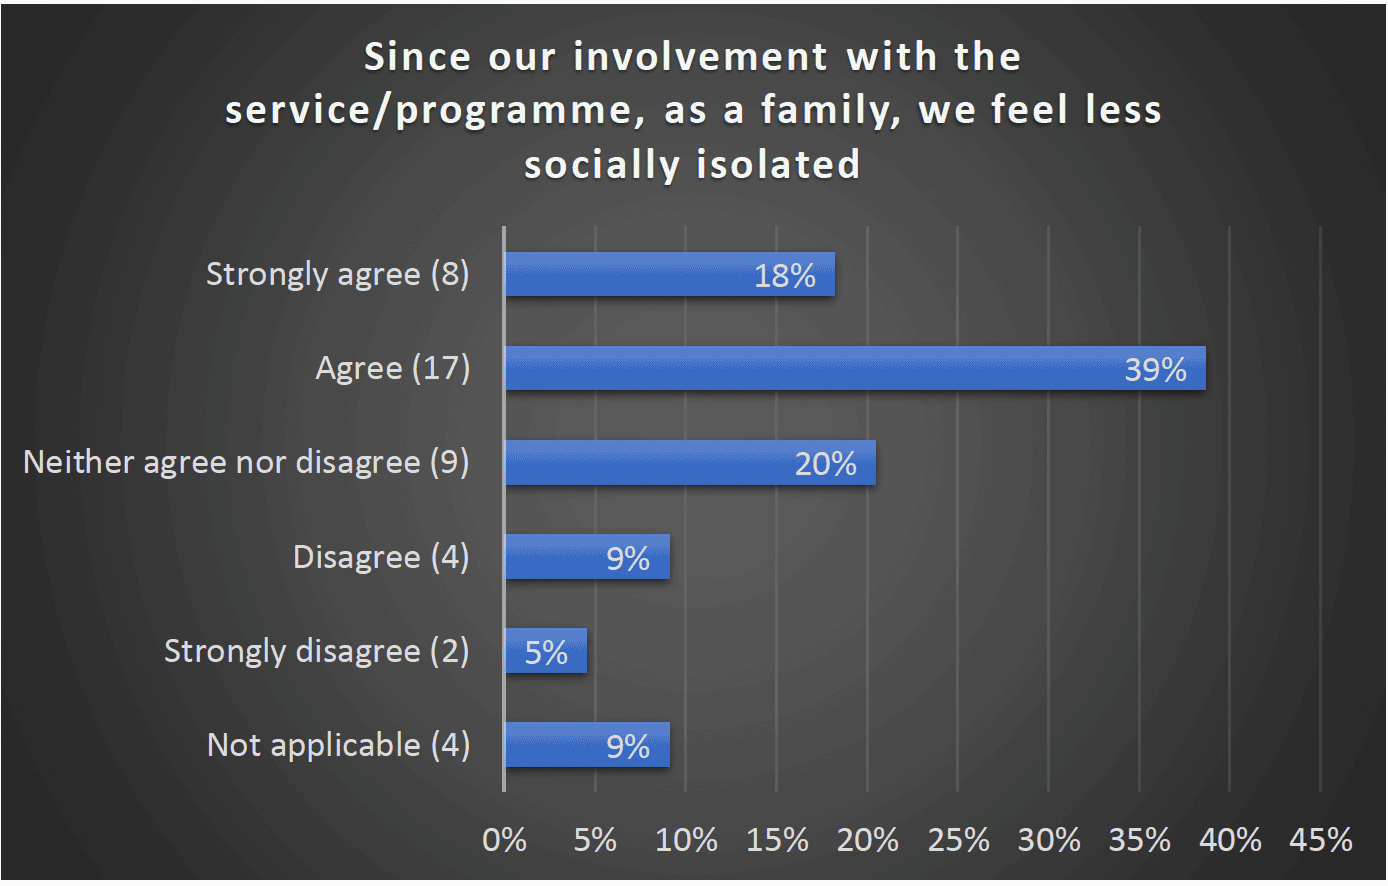 Since our involvement with the service/programme, as a family, we feel less socially isolated - Strongly agree (8) 18%, Agree (17) 39%, Neither agree nor disagree (9) 20%, Disagree (4) 9%, Strongly disagree (2) 5%, Not applicable (4) 9%